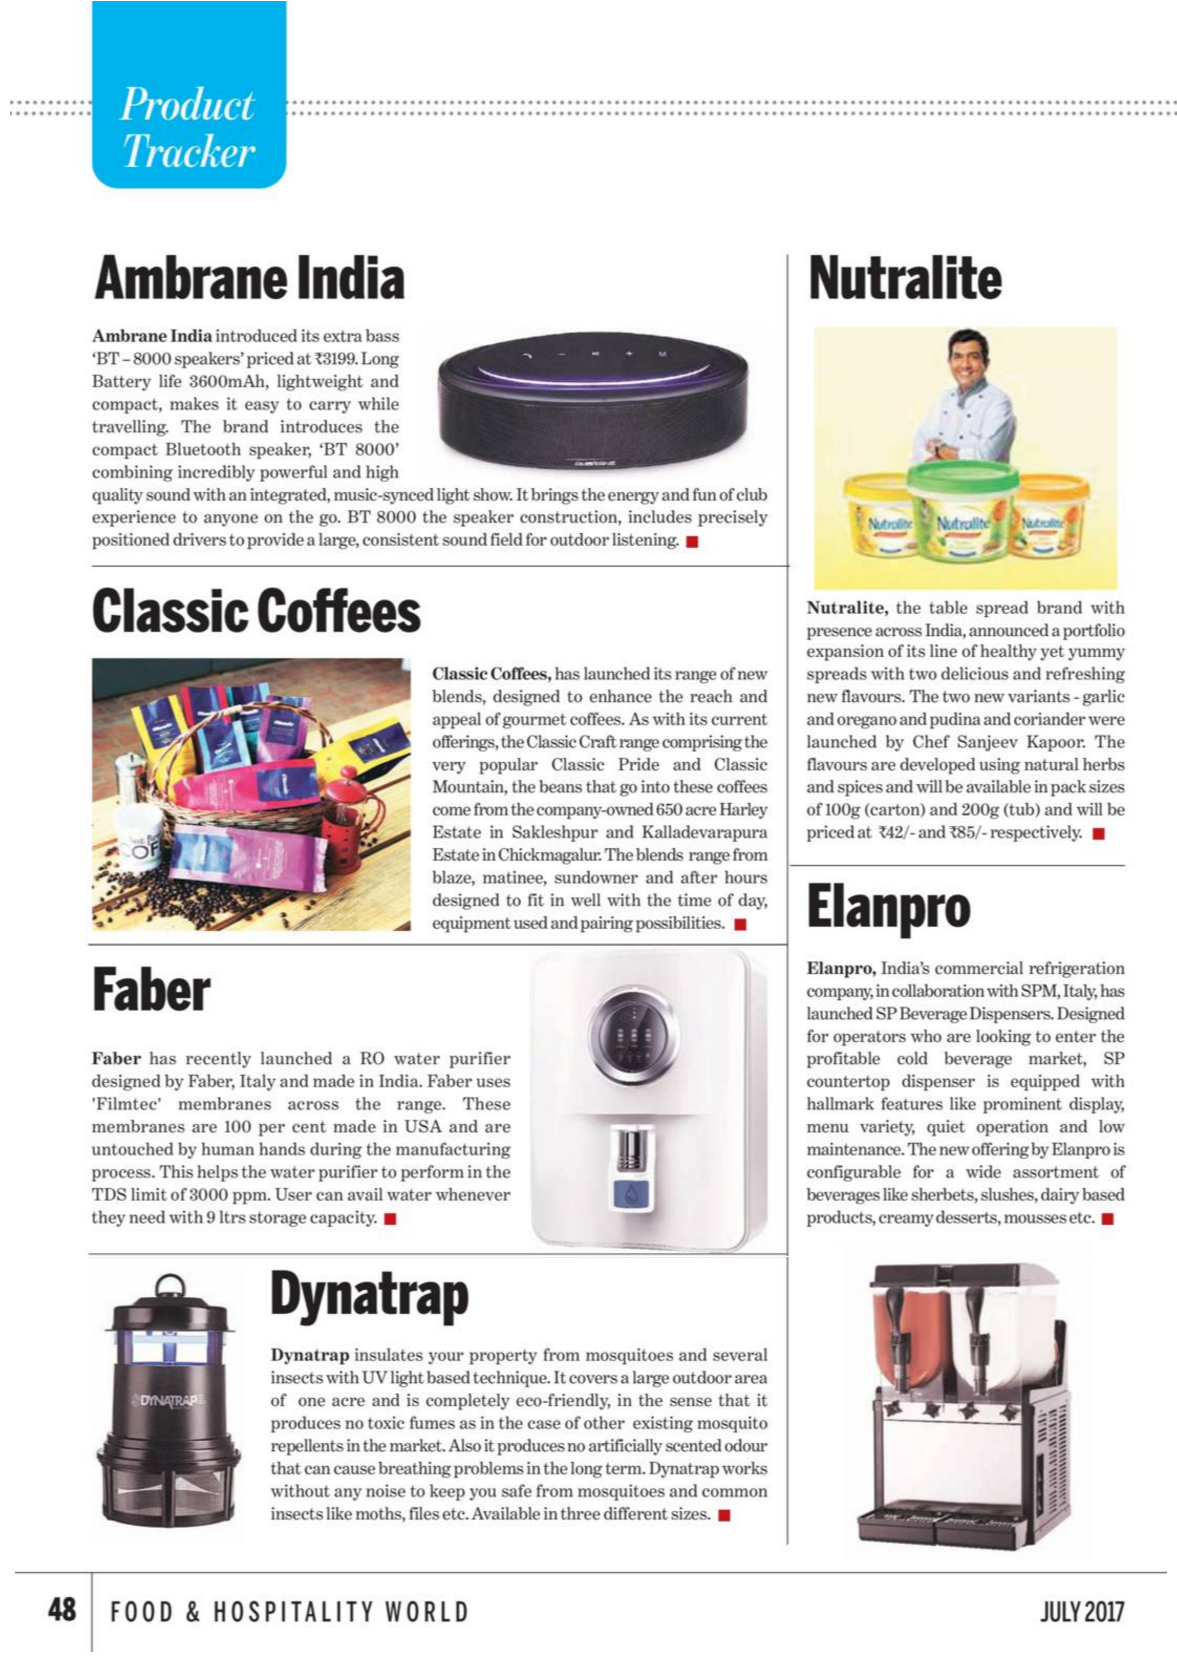 CLASSIC COFFEES - FOOD & HOSPITALITY WORLD - PG48 - JULY ISSUE